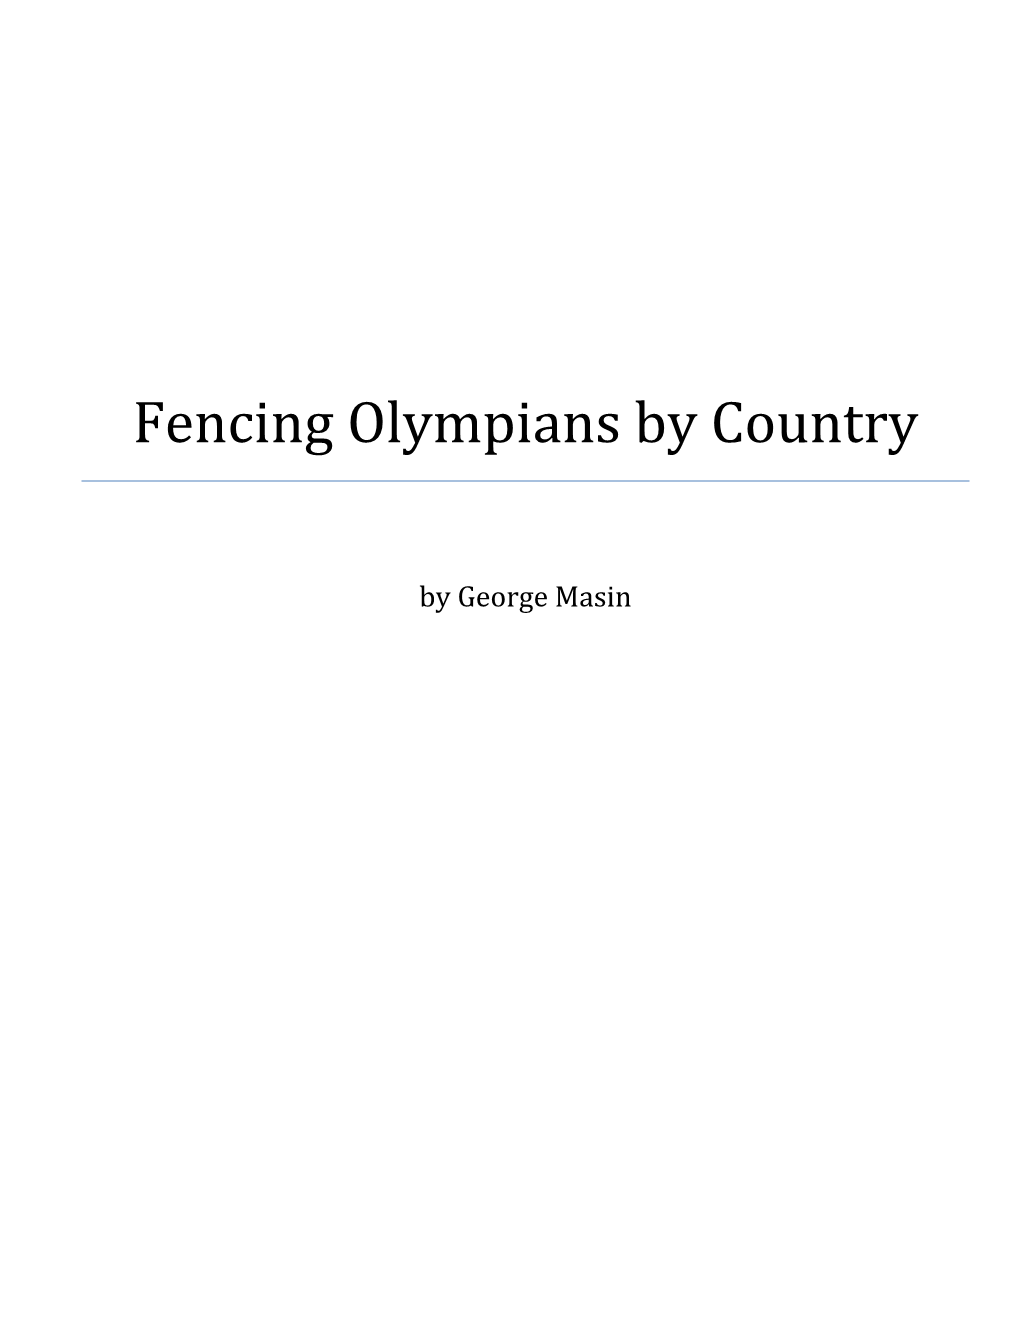 Fencing Olympians by Country